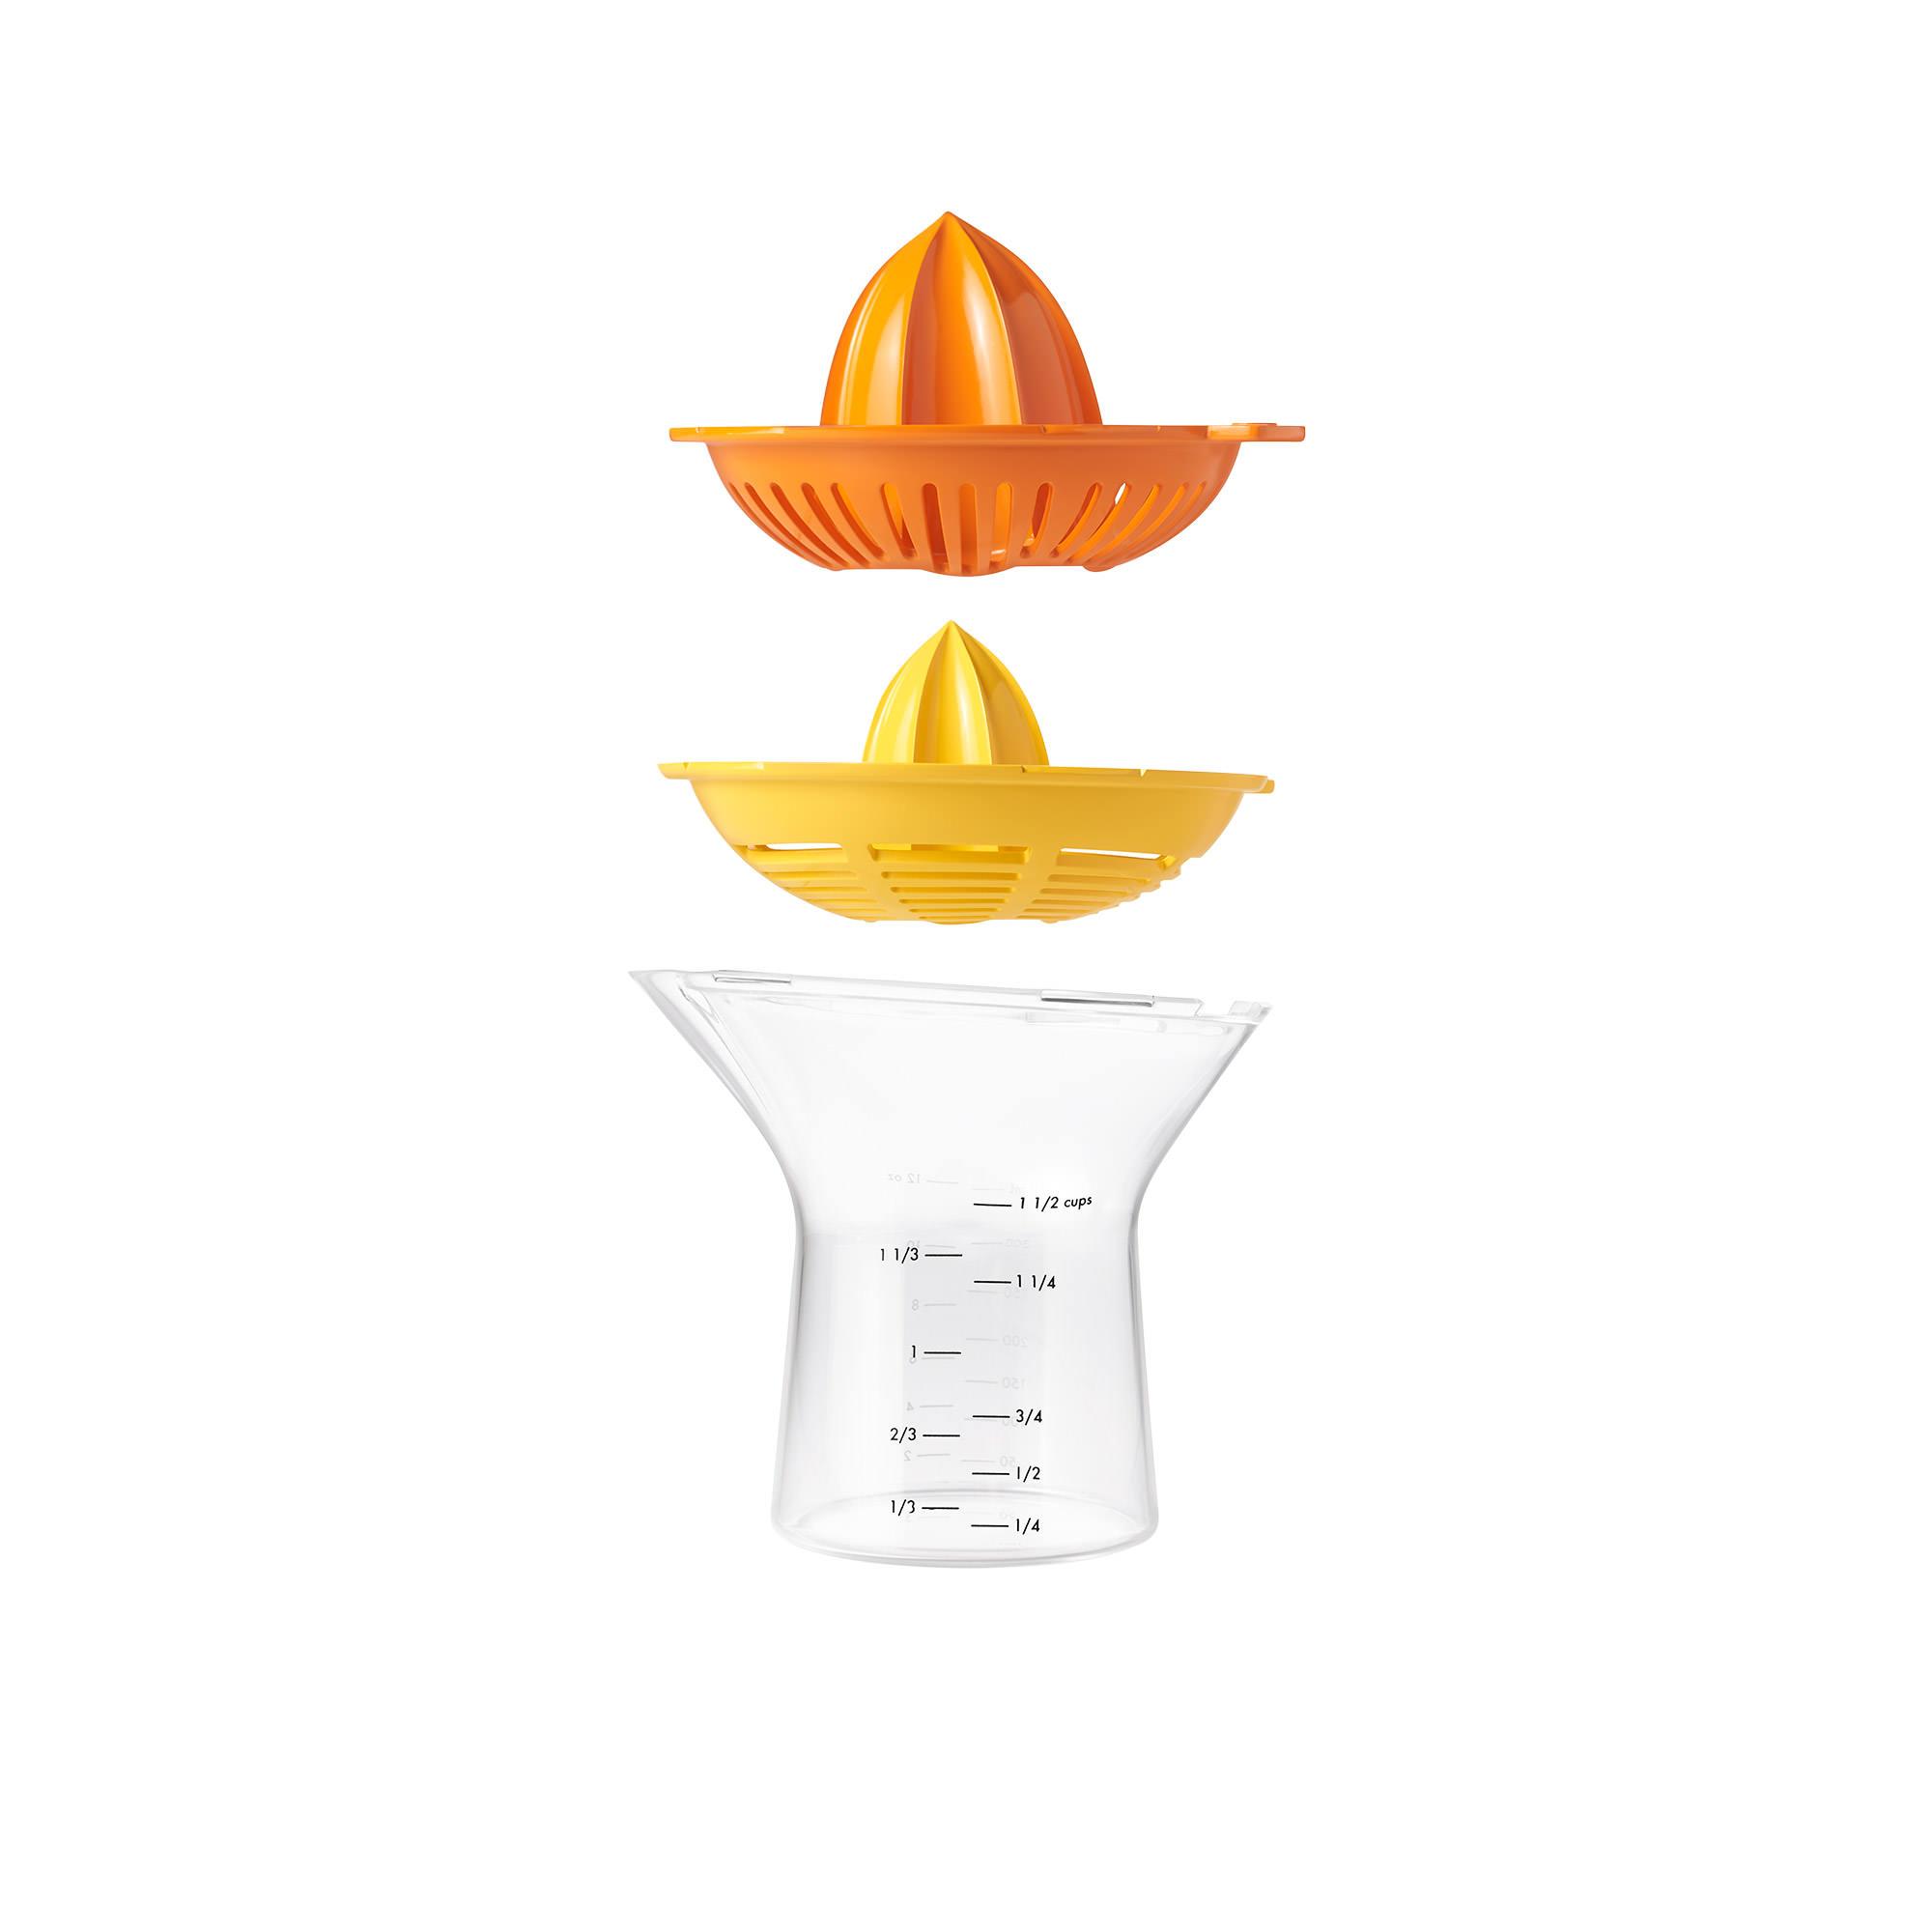 OXO Good Grips 2 in 1 Citrus Juicer Image 5